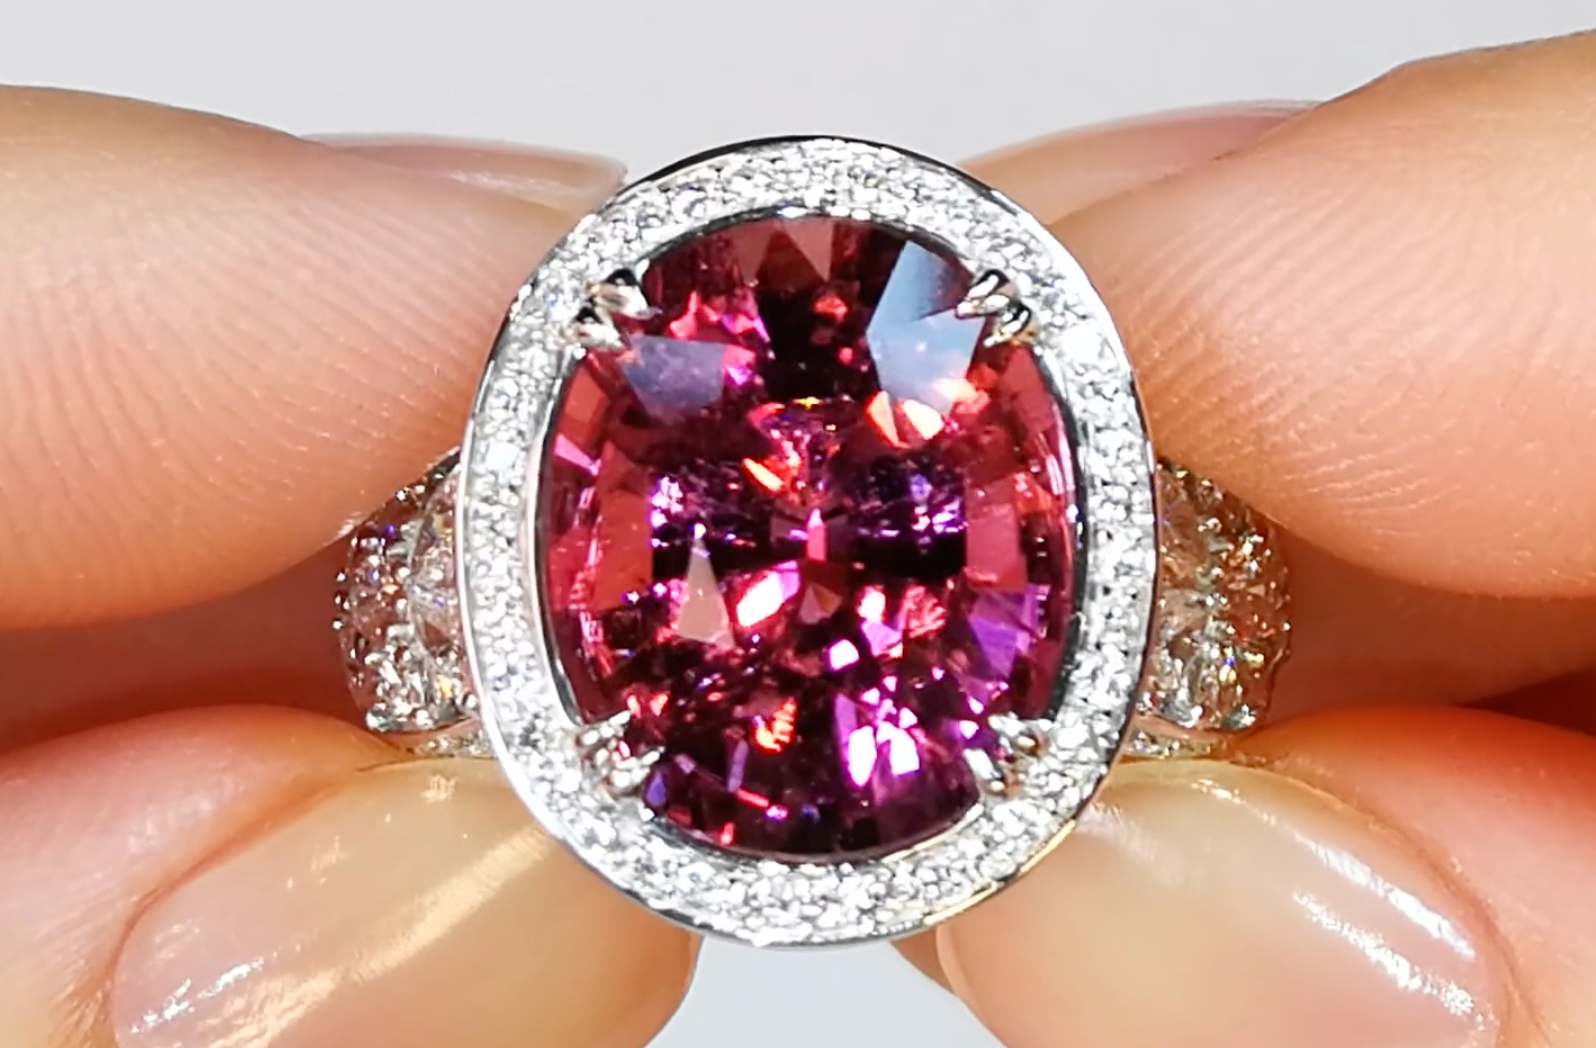 8.68ct Neon Rubellite Ring with D Flawless Diamonds set in 18K White Gold